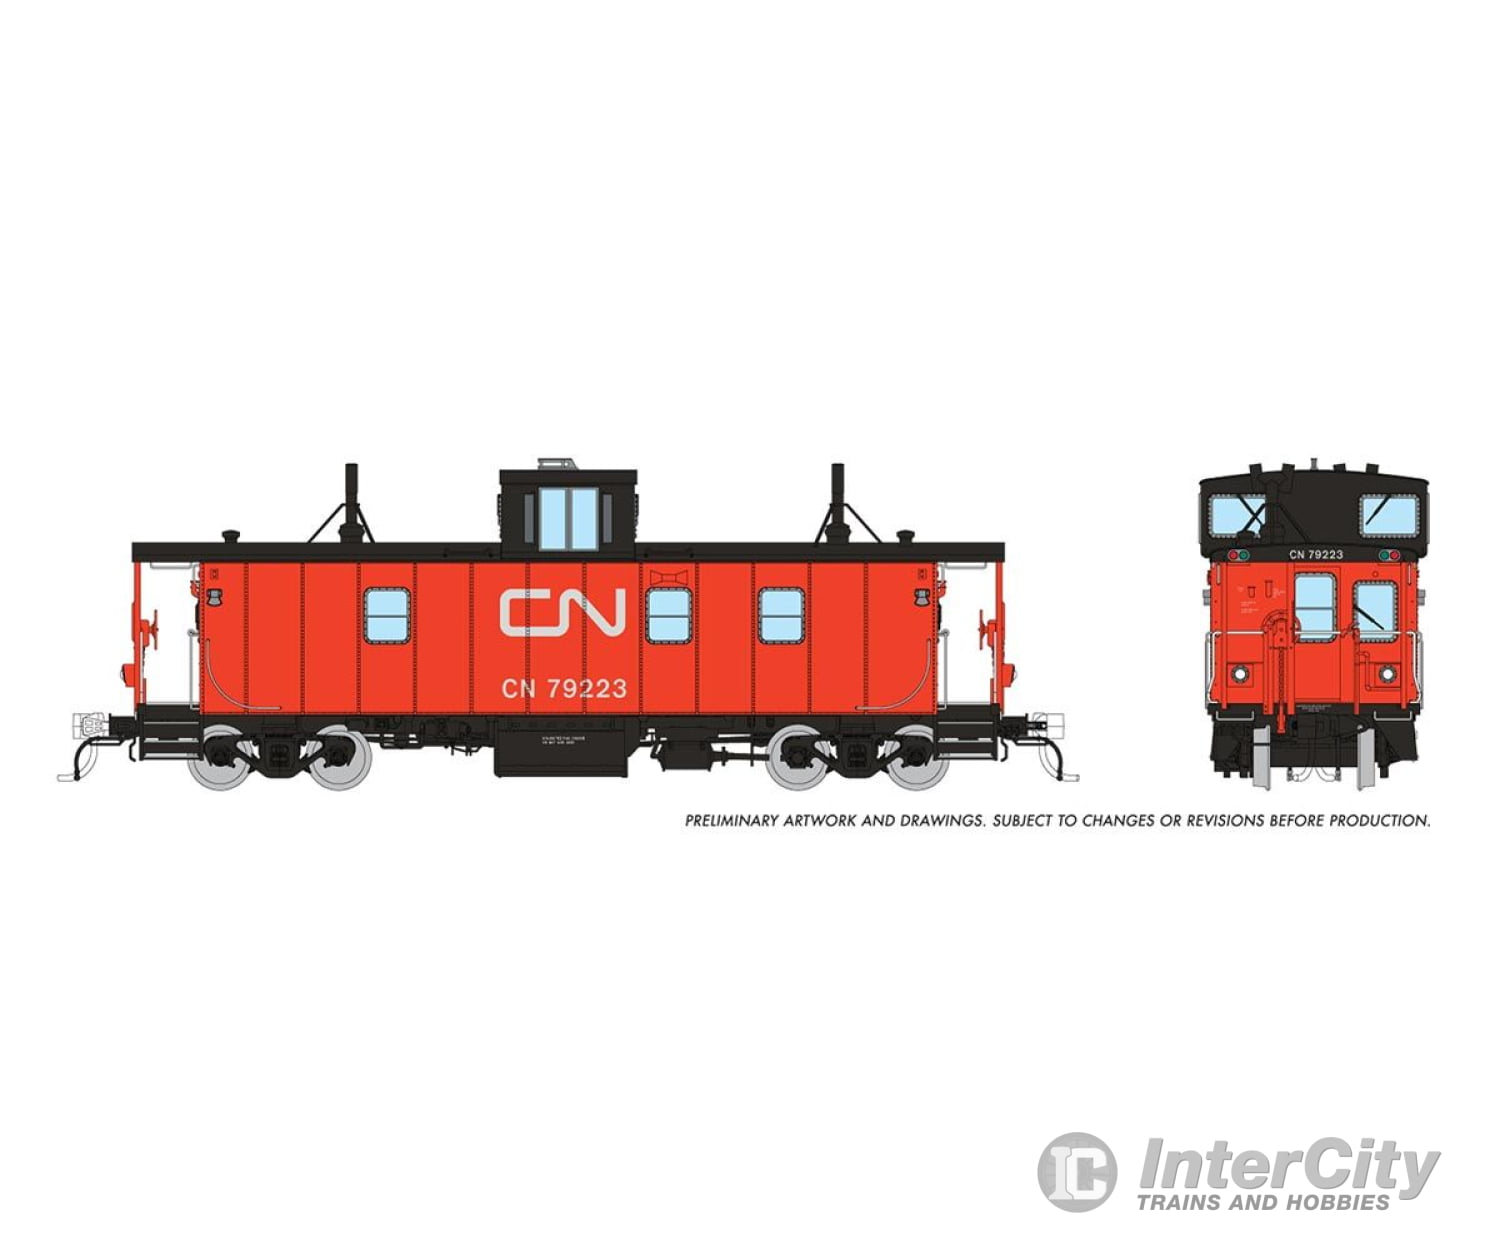 Rapido 166010 Ho Cn H - S Caboose: - Late W/ Black Steps: #79223 Freight Cars